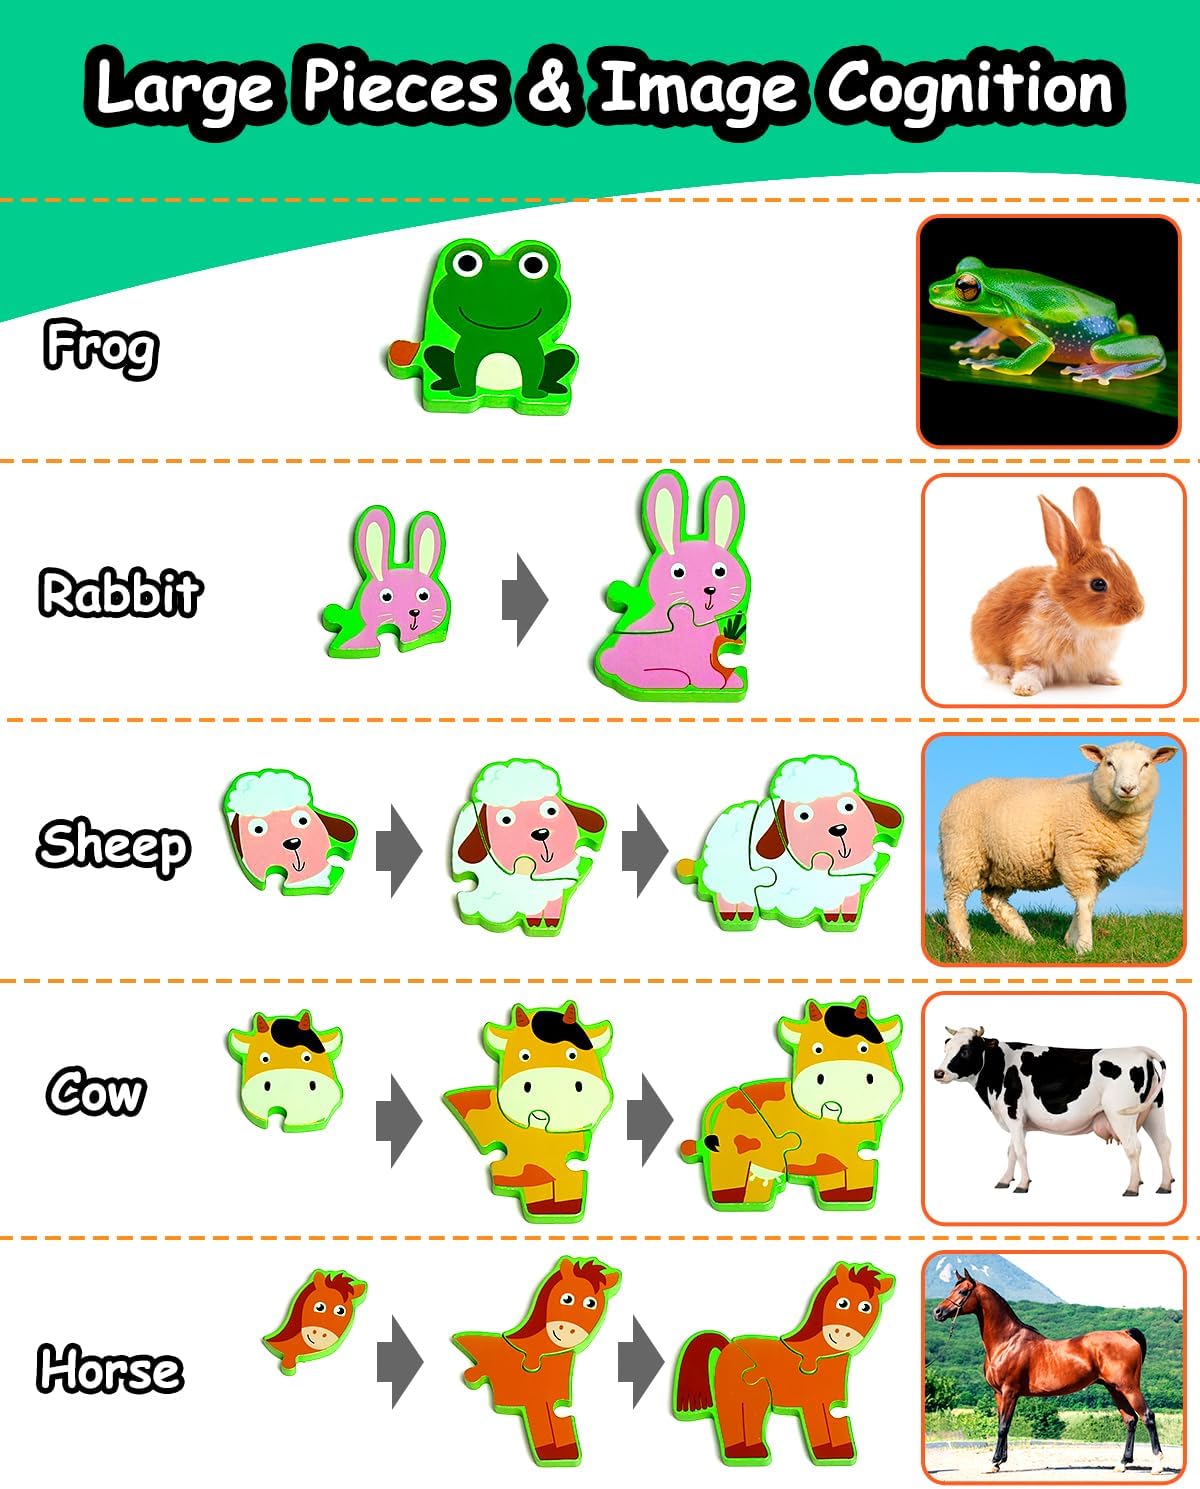 Farm Animals for Toddlers 1-3, Toddler Puzzles, Farm Toys Wooden Puzzles for Toddlers - Cykapu